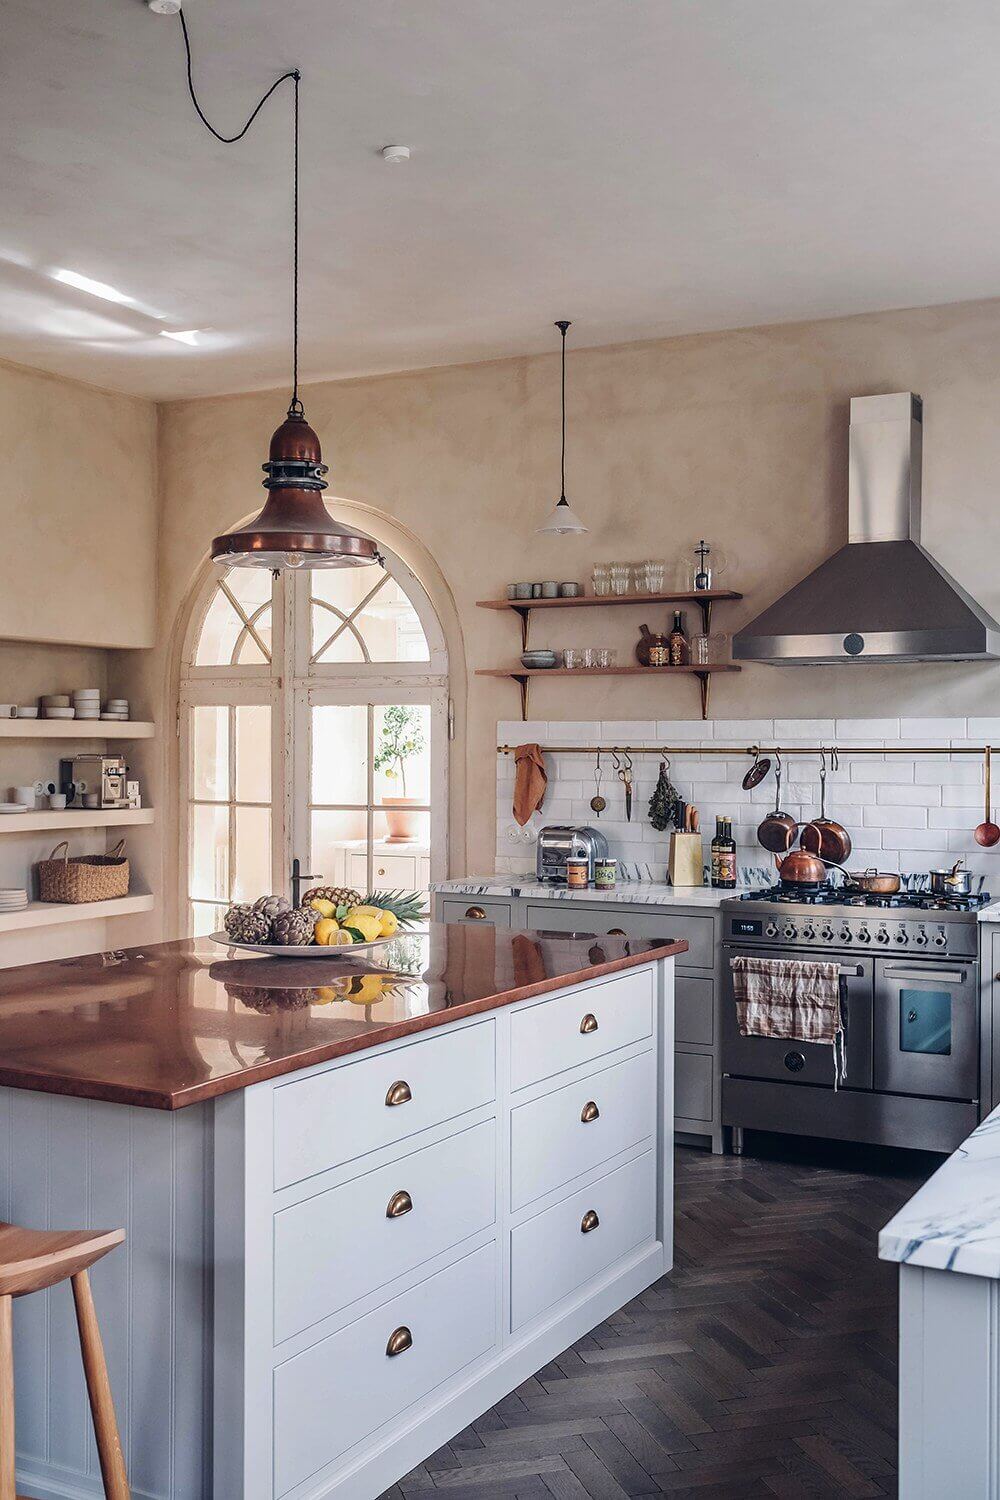 devol-kitchen-our-food-stories-renovated-schoolhouse-germany-nordroom